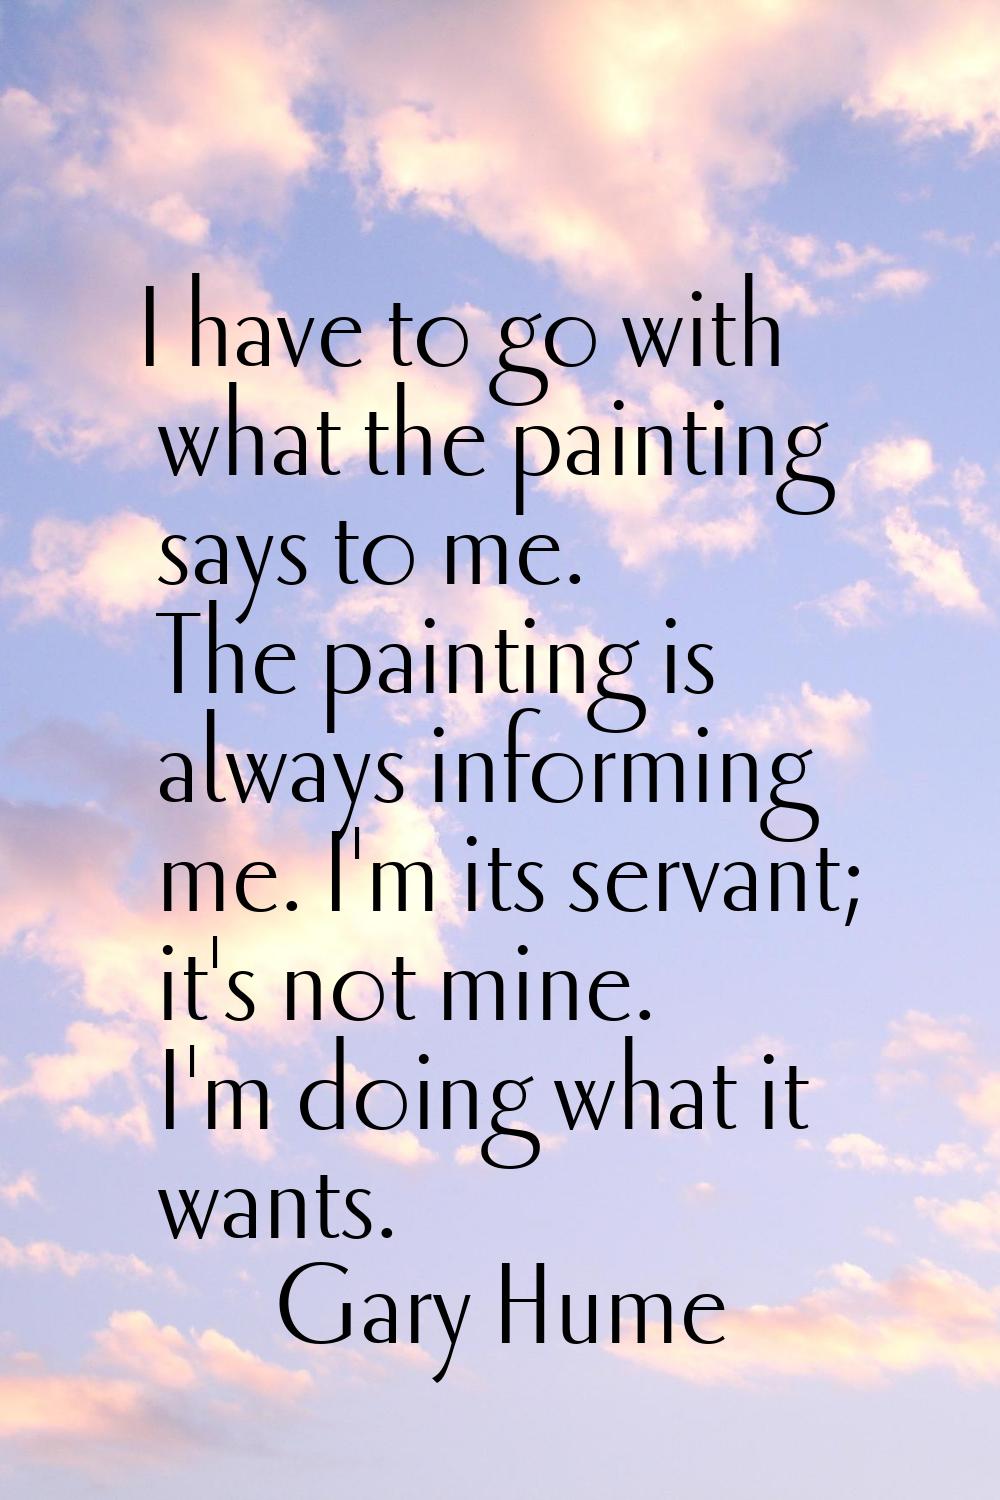 I have to go with what the painting says to me. The painting is always informing me. I'm its servan